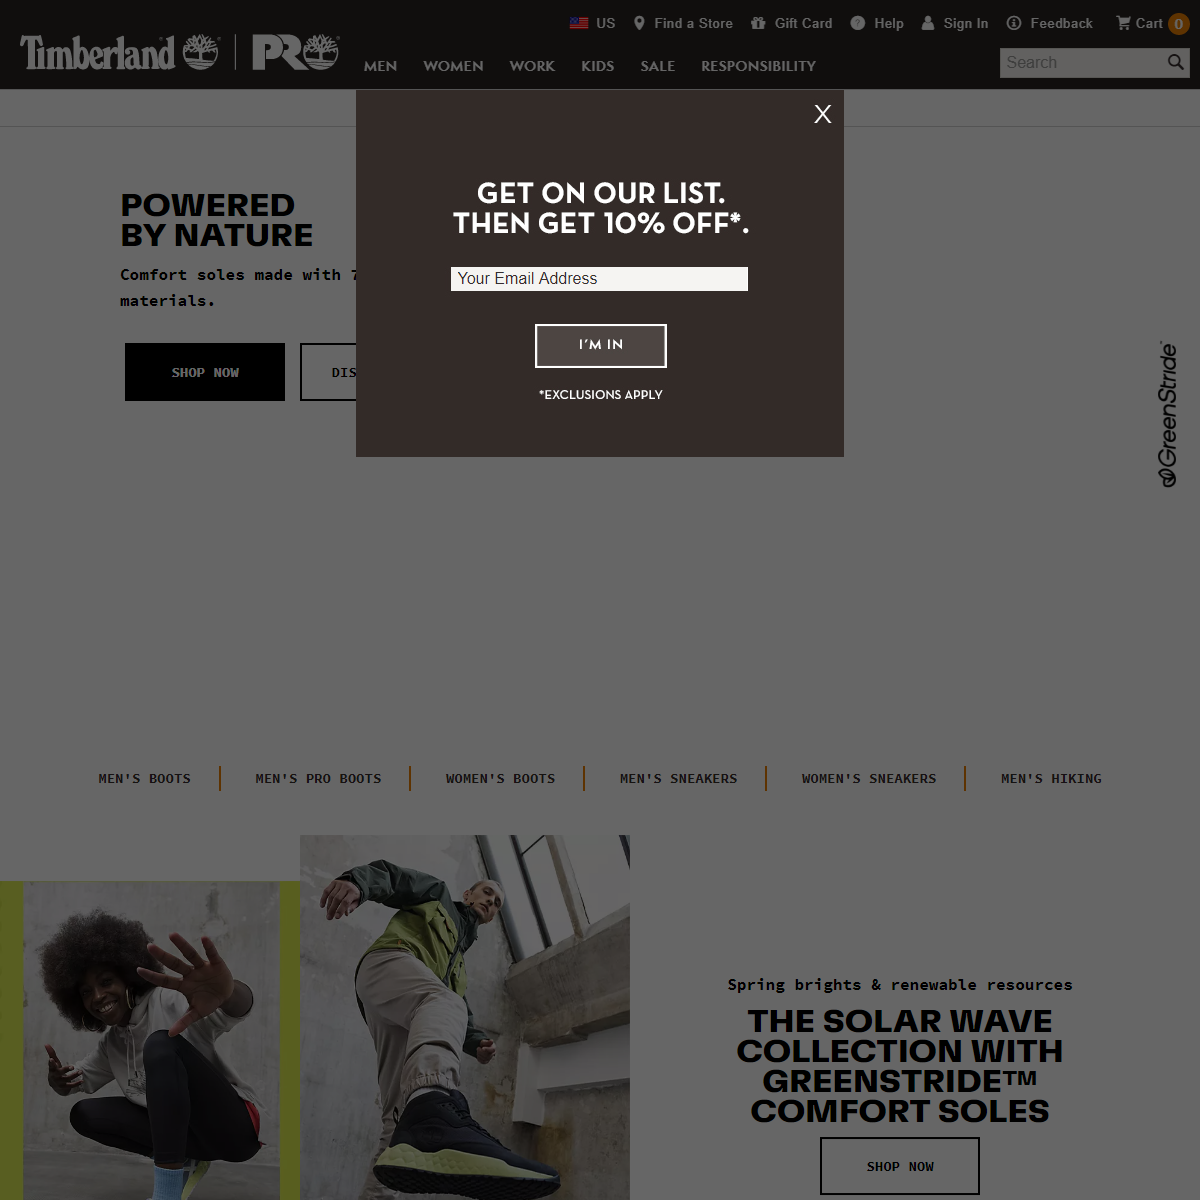 A complete backup of https://www.timberland.com/